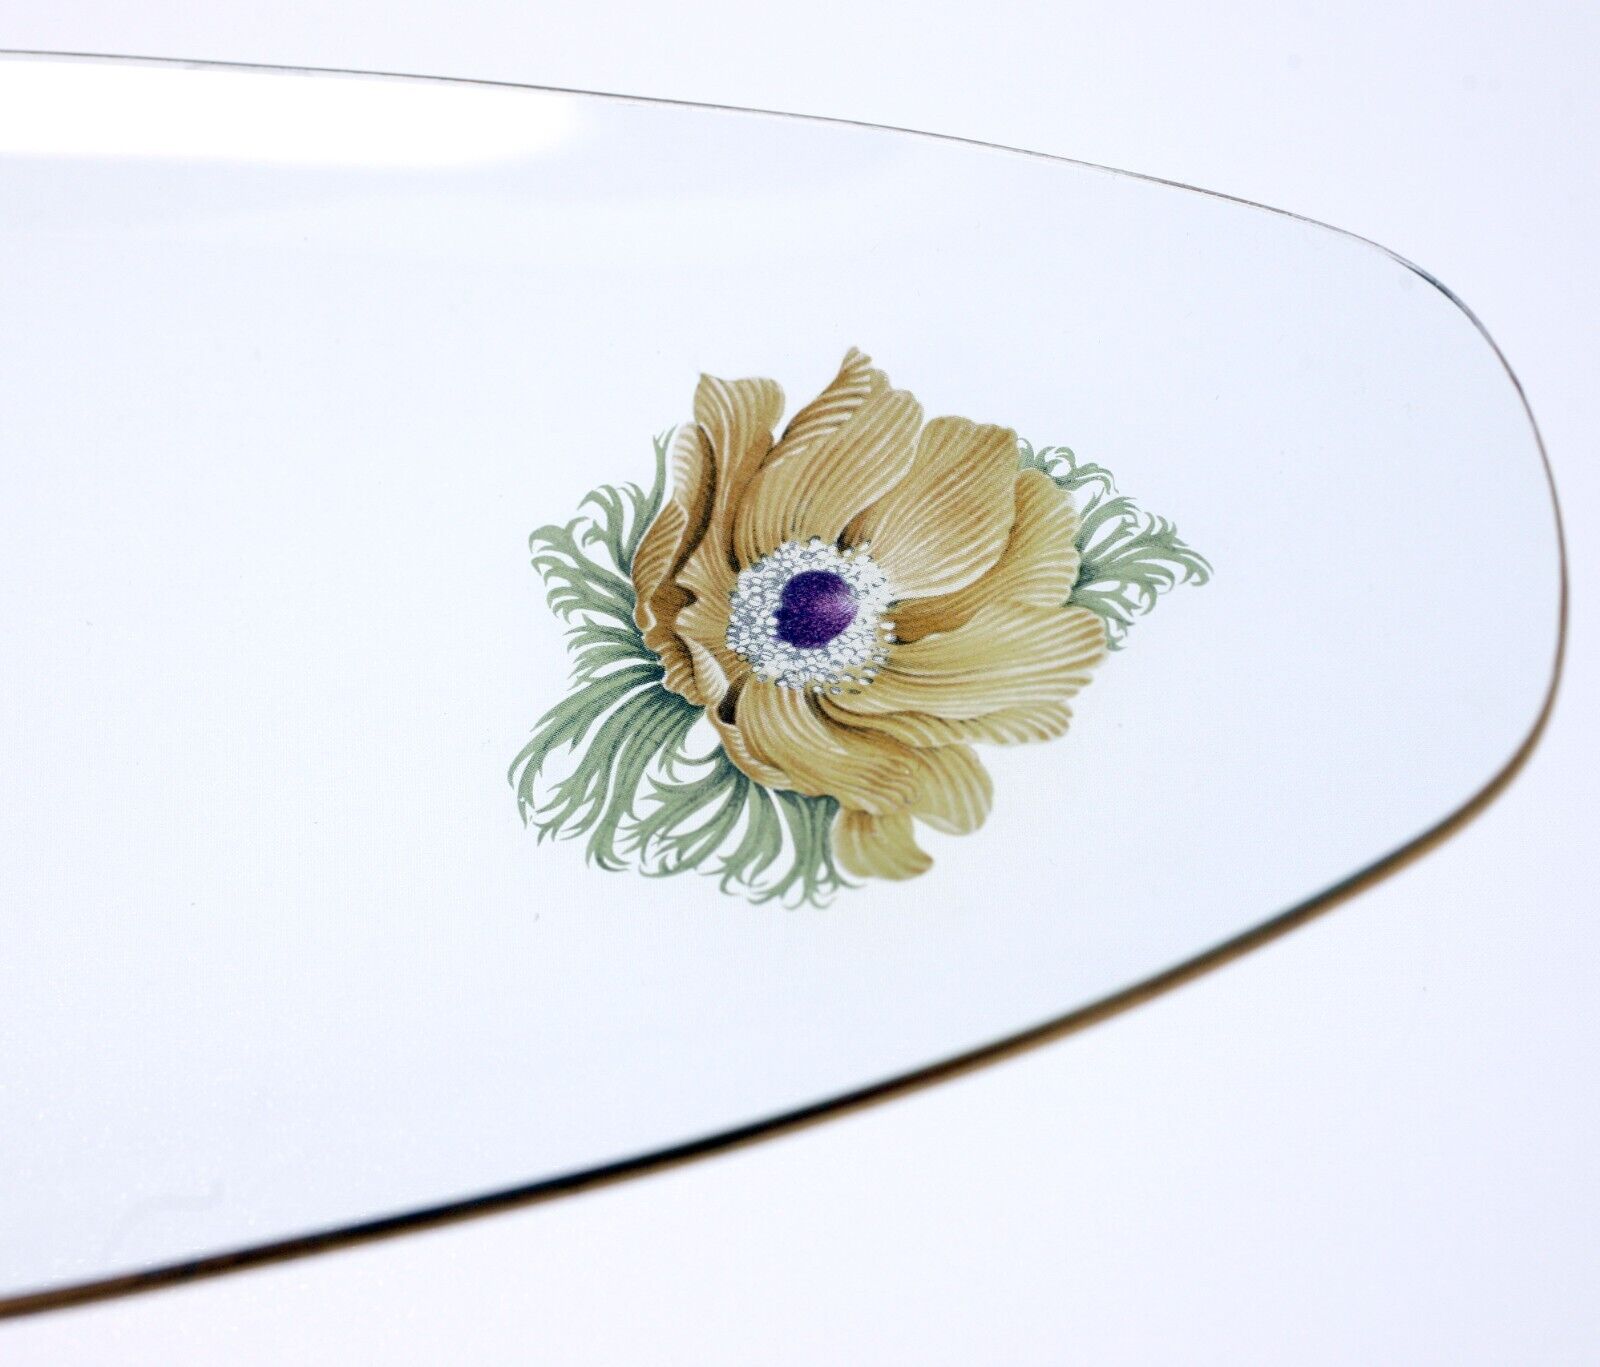 Vintage oval shaped glass dish with a floral detail-circa 1960s-Weight 284g